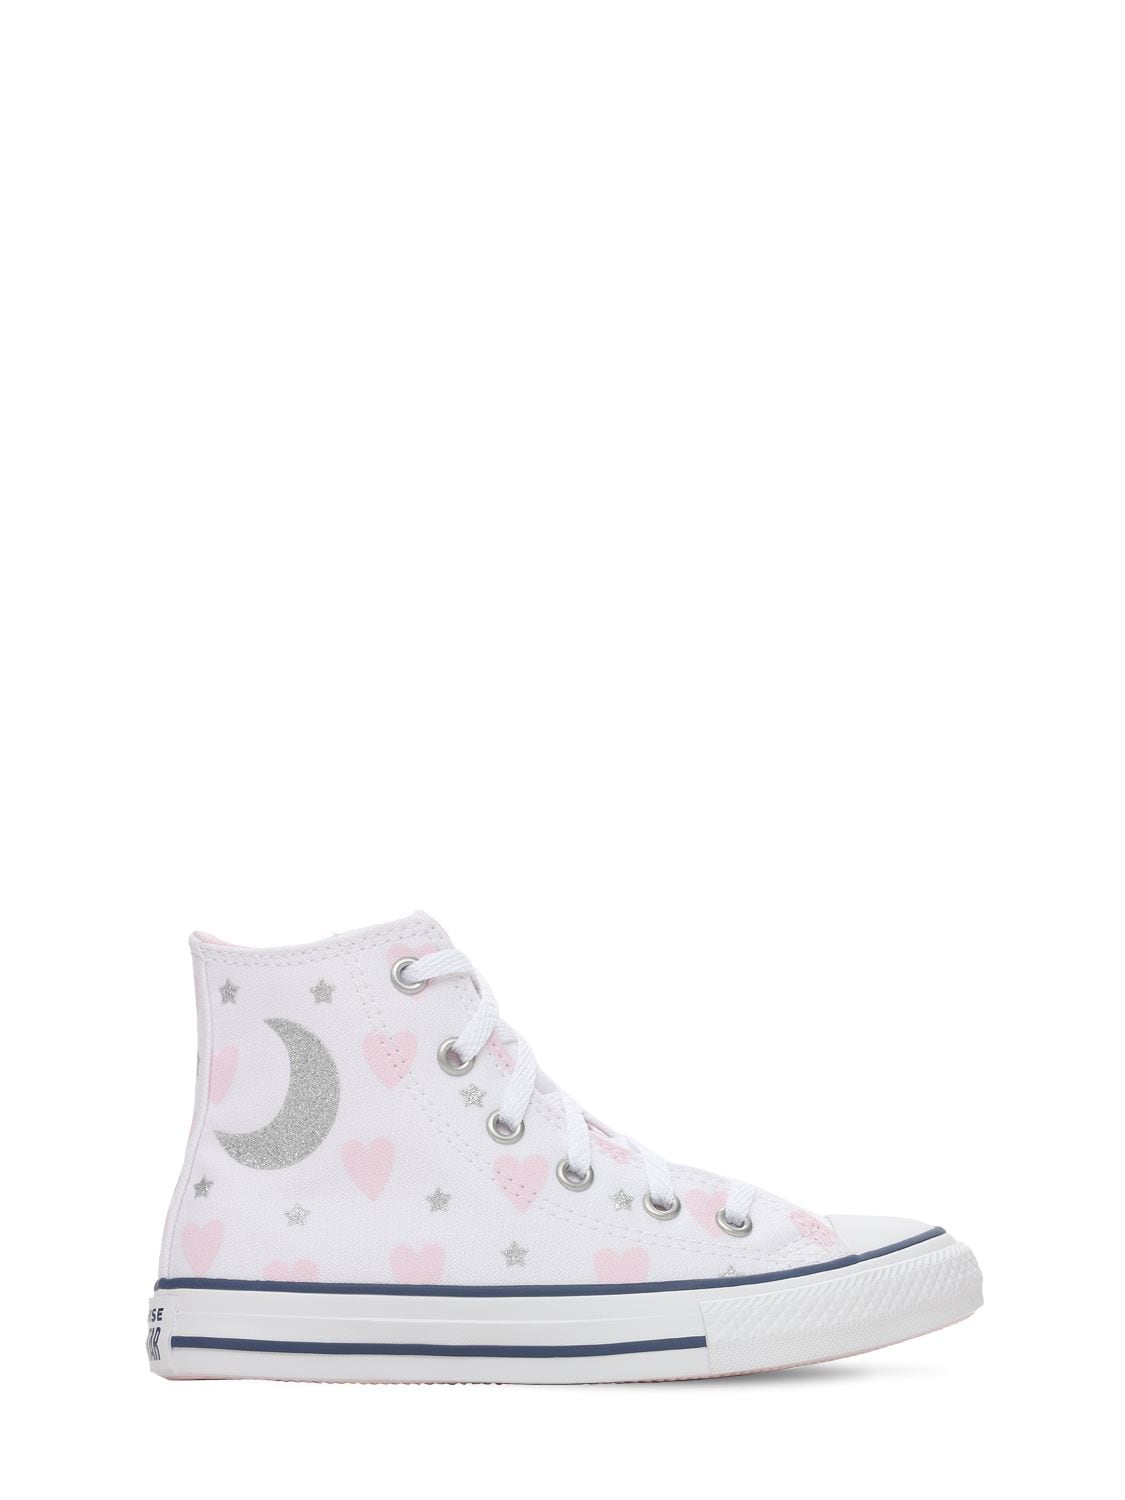 Converse Kids' “chuck Taylor”高帮运动鞋 In White